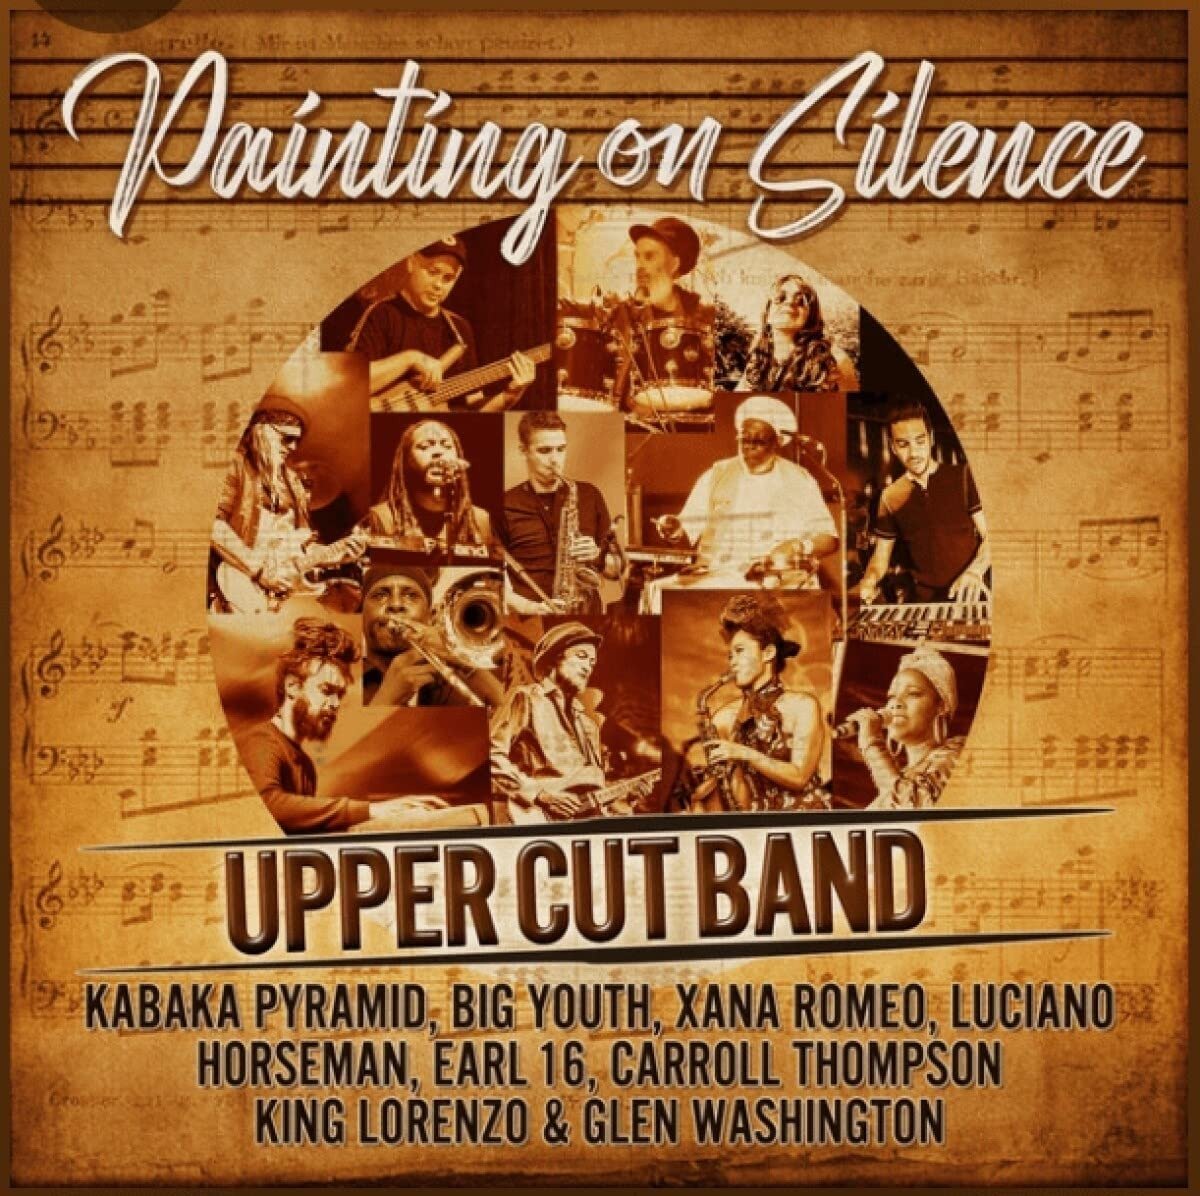 CD Shop - UPPERCUT BAND FT. VARIOUS PAINTING ON SILENCE